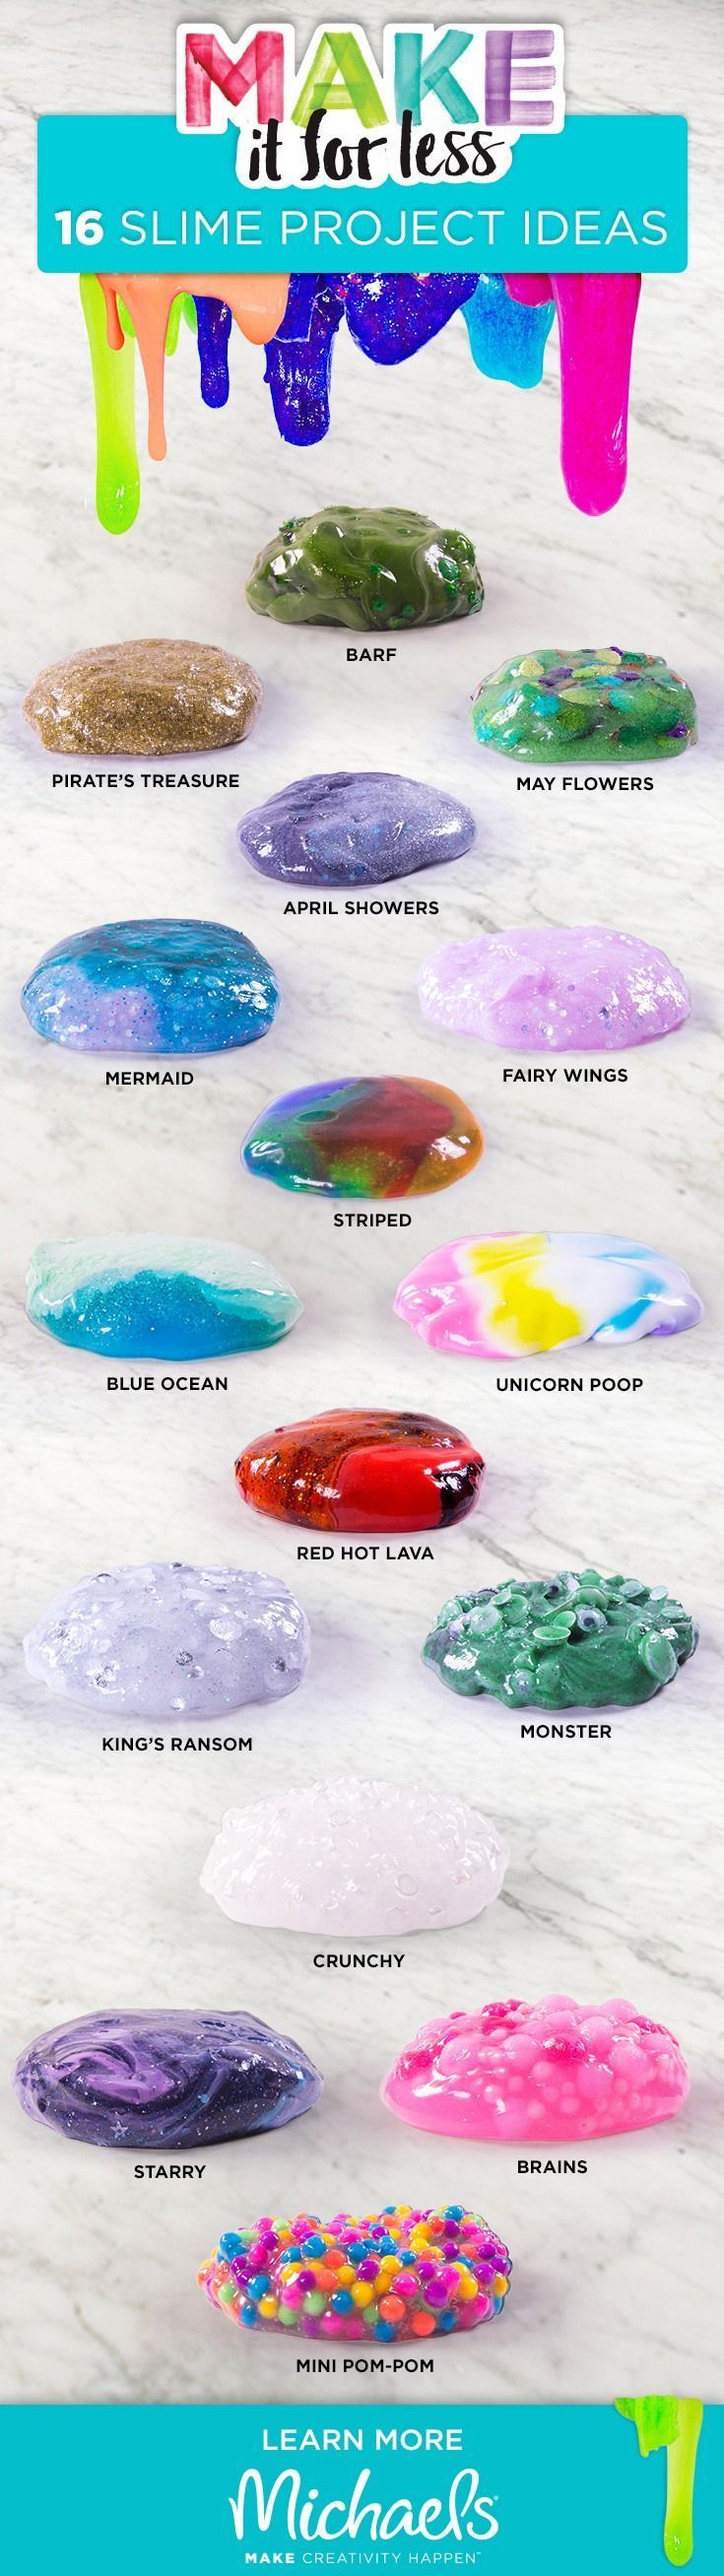 Get ready for some ooey, gooey, fun! Check out these 16 DIY slime projects that kids (and adults!) will love. Explore slime